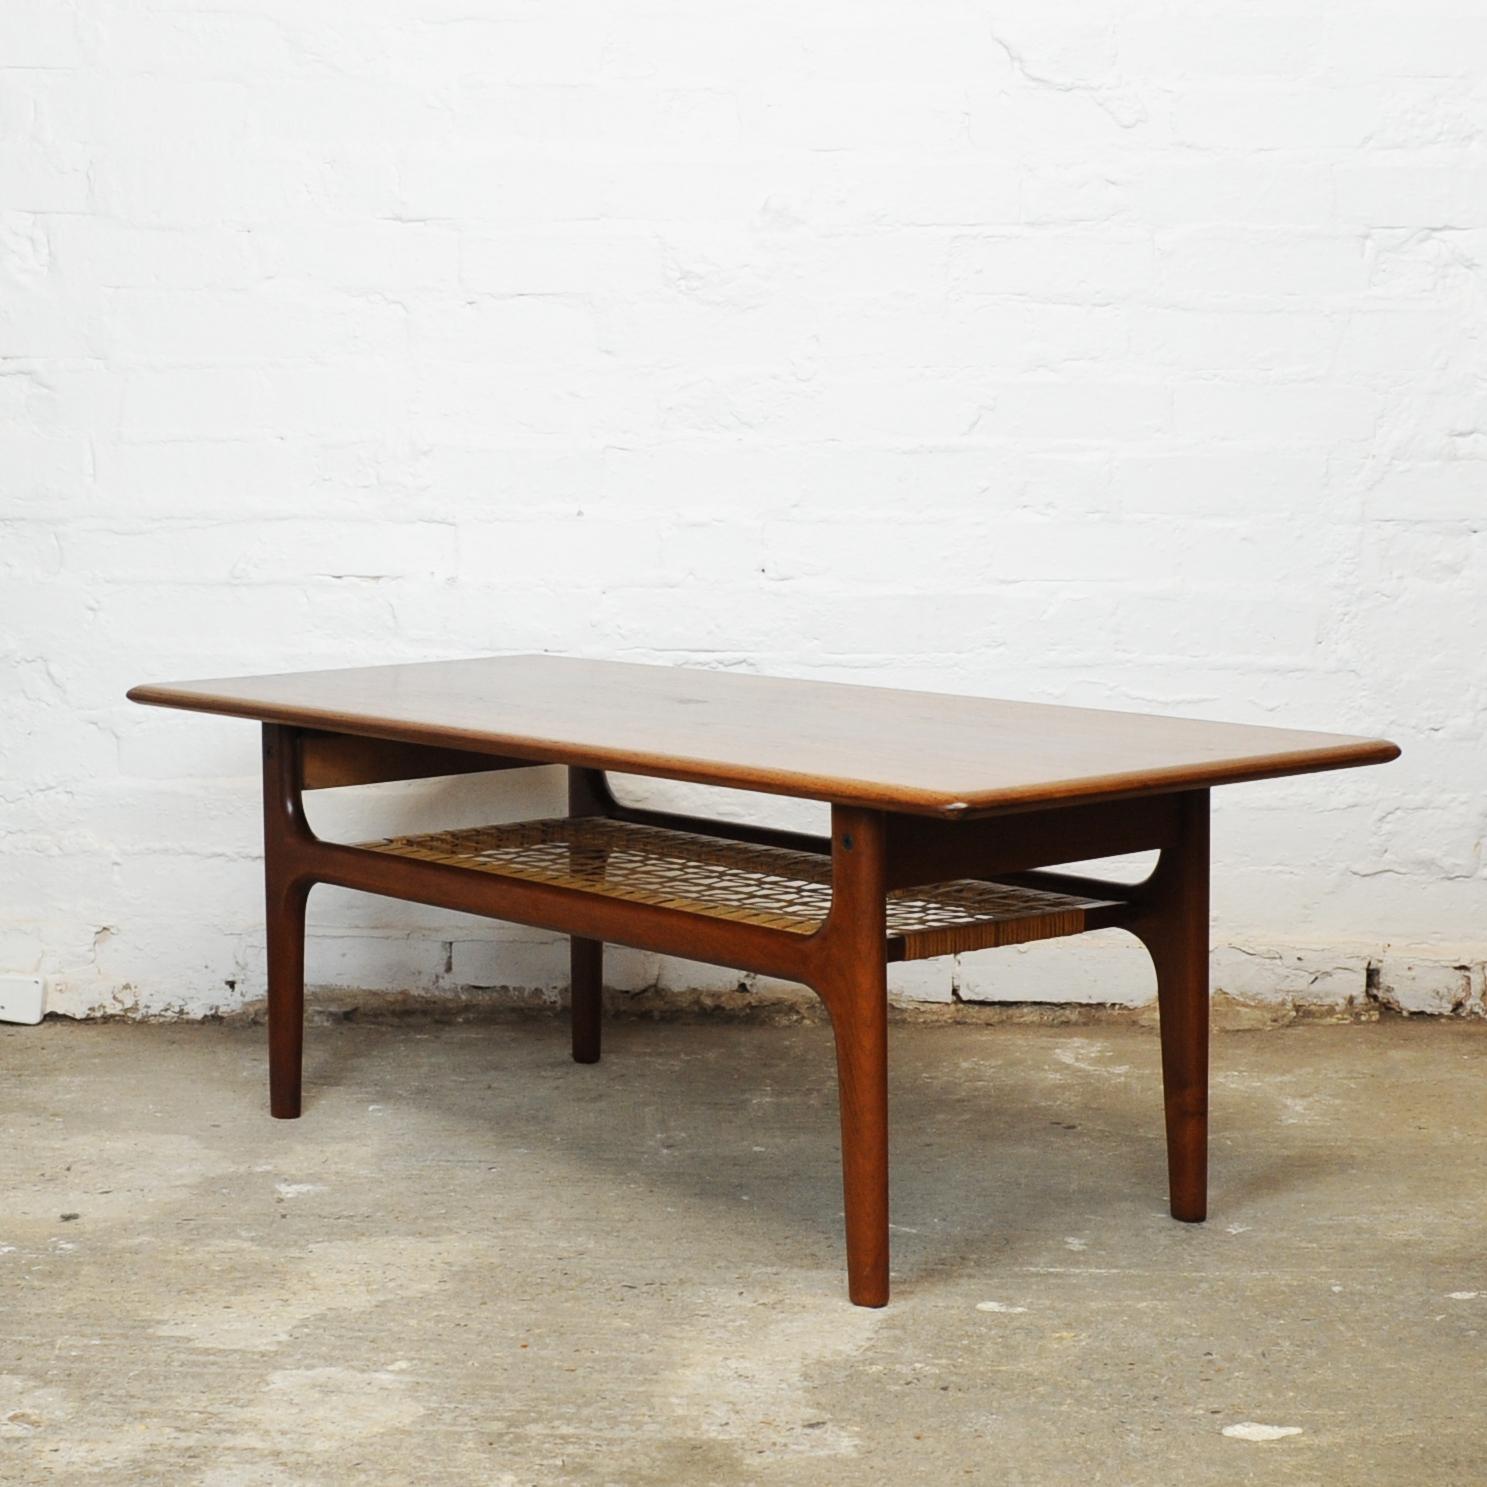 Teak and Cane Danish Coffee Table by Trioh Mobler, 1960s For Sale 5